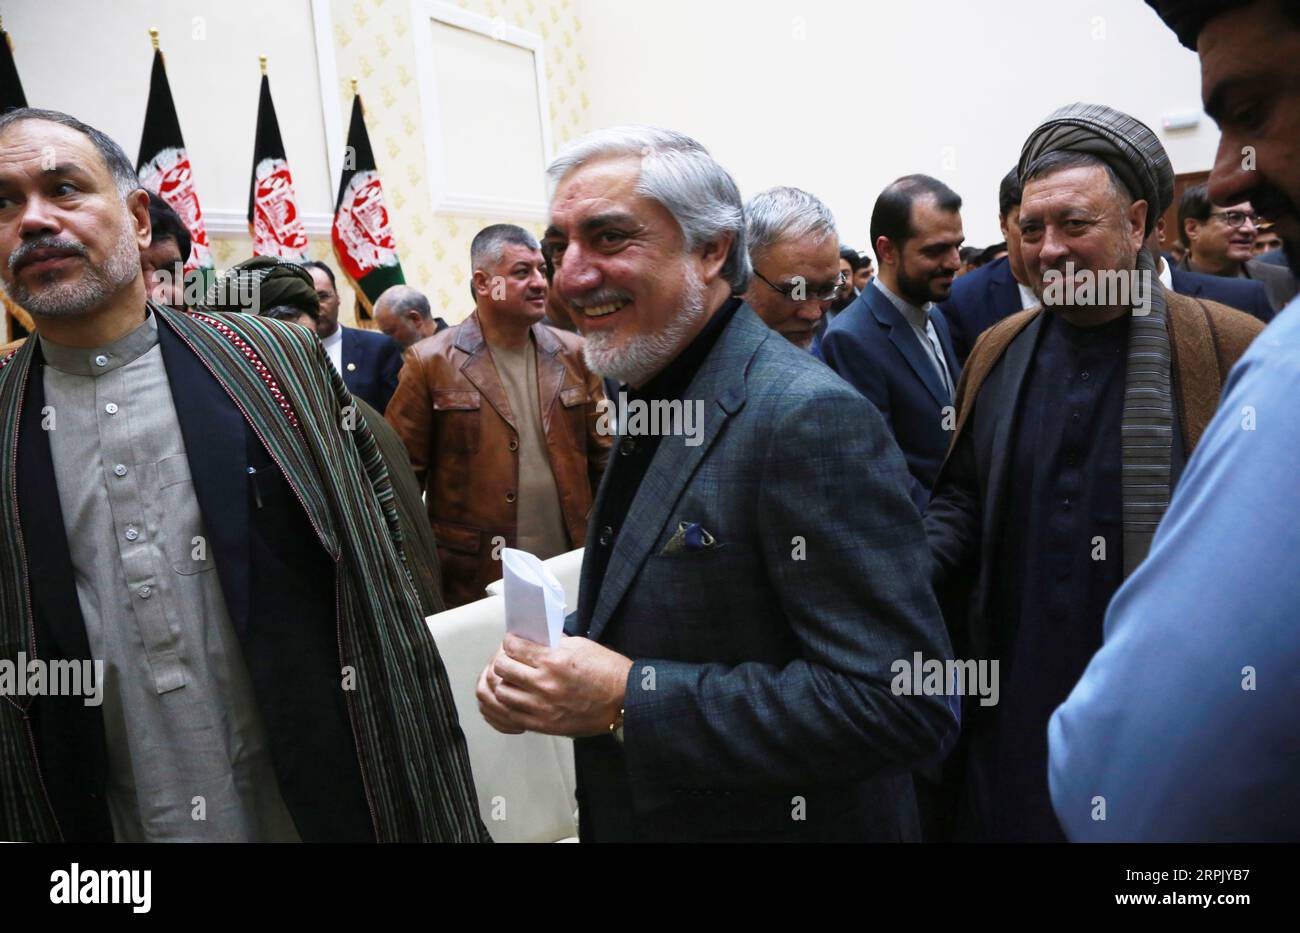 News Bilder des Tages 191222 -- KABUL, Dec. 22, 2019 -- Afghan presidential candidate Abdullah Abdullah C leaves after a press conference in Kabul, capital of Afghanistan, on Dec. 22, 2019. Afghan President Mohammad Ashraf Ghani has welcomed the preliminary results of the presidential election announced on Sunday as fair and expressed his congratulations to the nation and gratitude to the election commission. However, his rival in the presidential race Abdullah Abdullah described it as a fraudulent practice and vowed to fight through legal means until the fake votes were separated from the leg Stock Photo